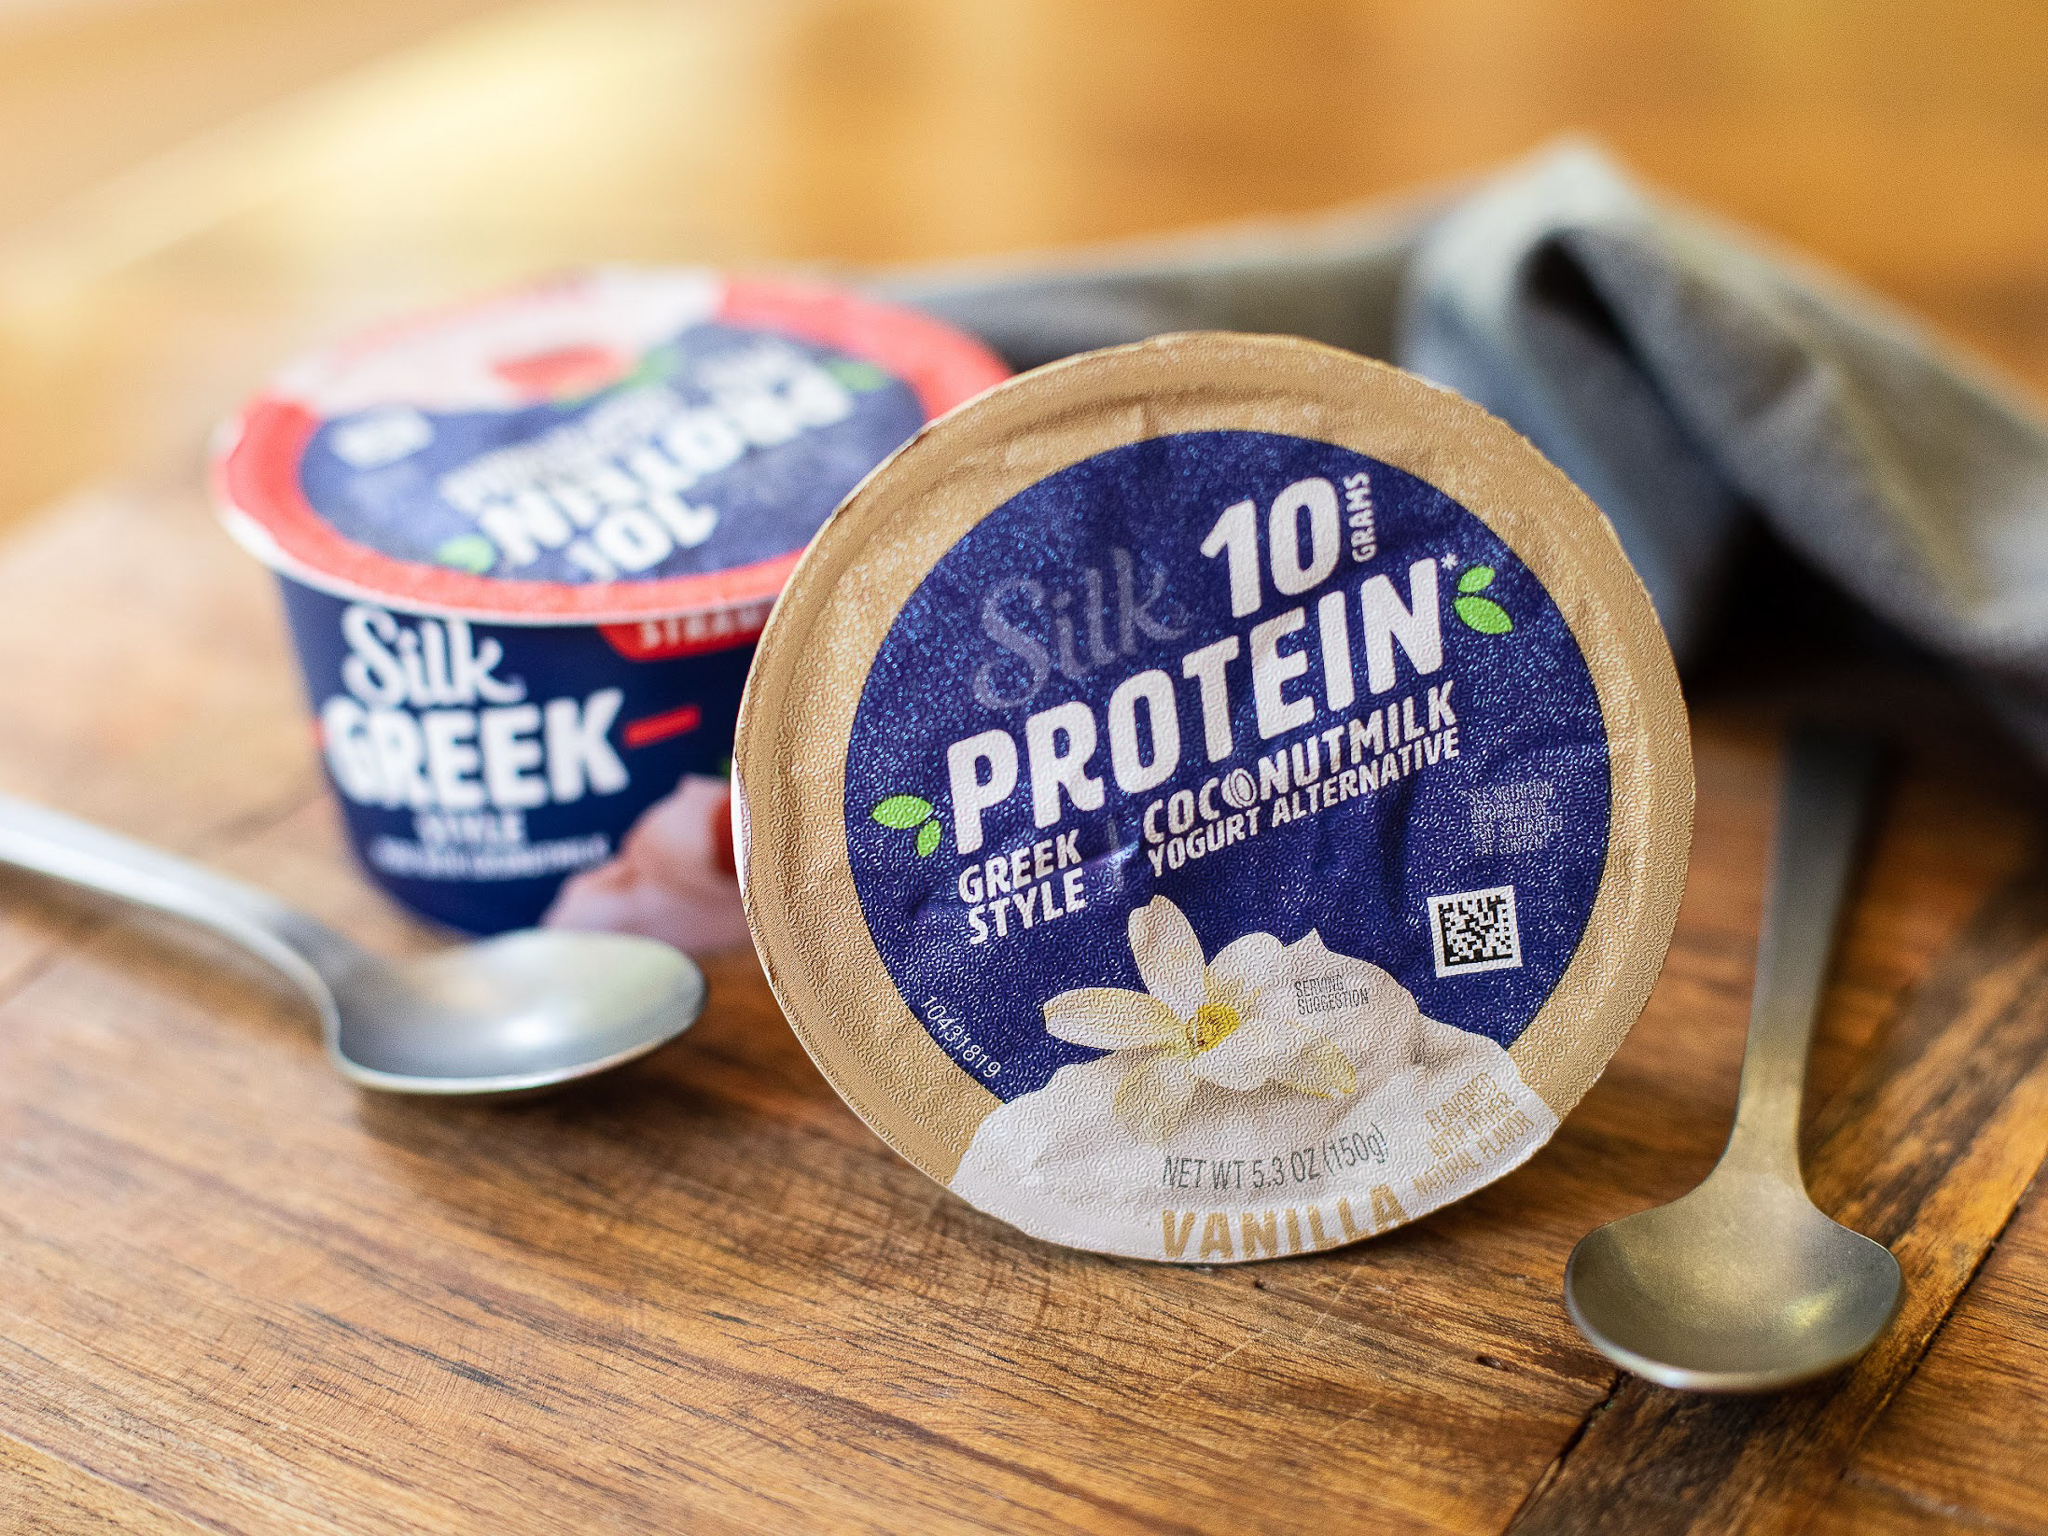 Silk Greek Style Coconutmilk Yogurt Alternative Coupon Makes A Cup As Low As 50¢ At Publix on I Heart Publix